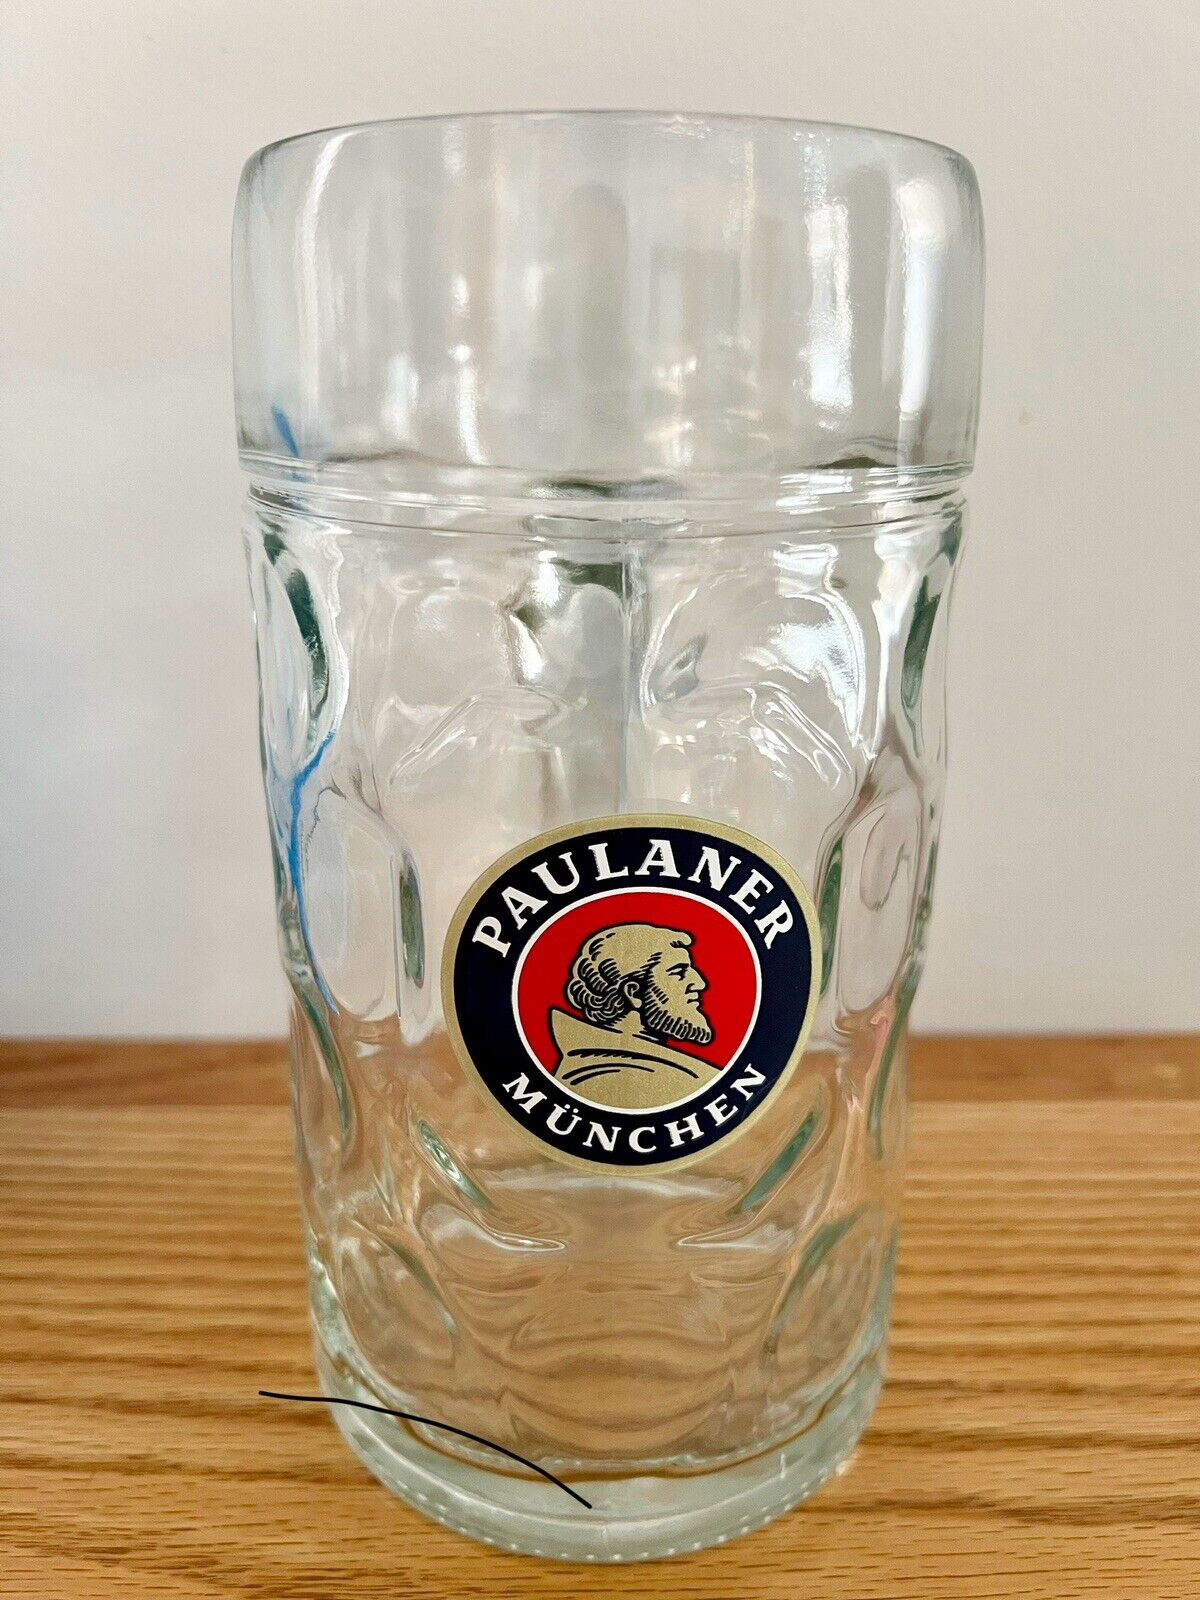 Paulaner Oktoberfest Limited Edition 1 Liter Glass Beer Stein Made in Germany